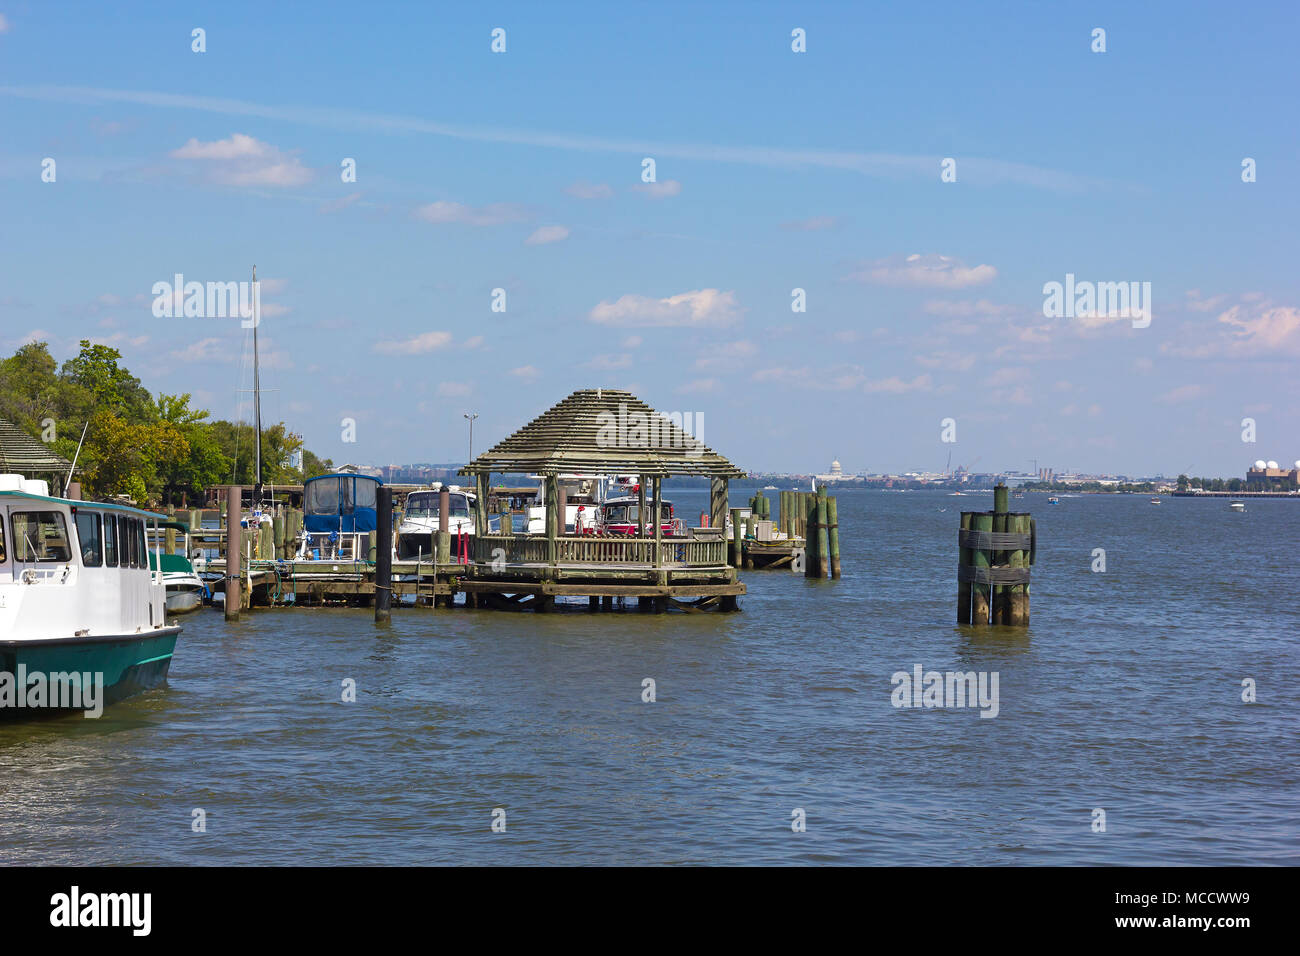 A pier at waterfront of Old Town Alexandria, Virginia, USA. A wooden gazebo and views over the Potomac River with US capital on horizon. Stock Photo